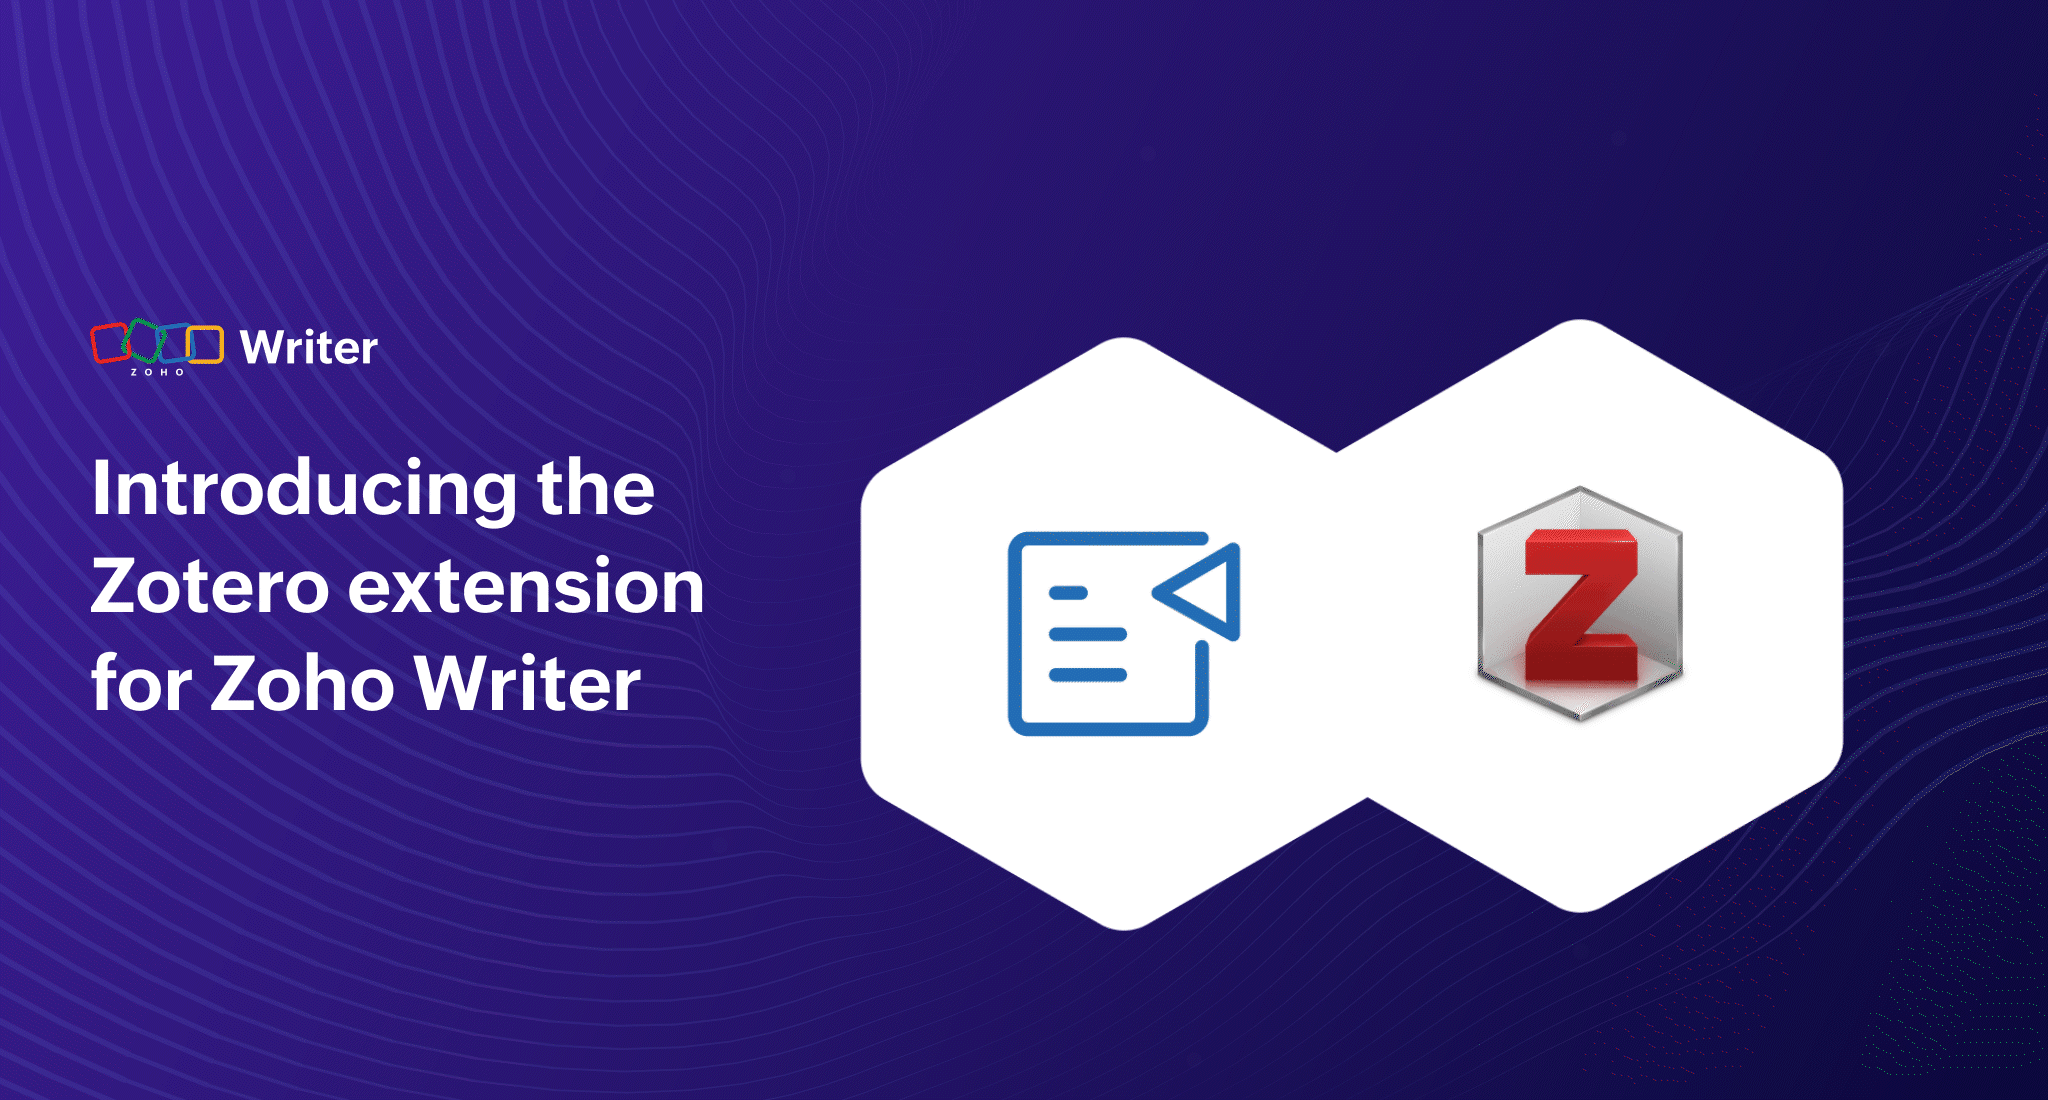 Introducing the Zotero extension for Zoho Writer